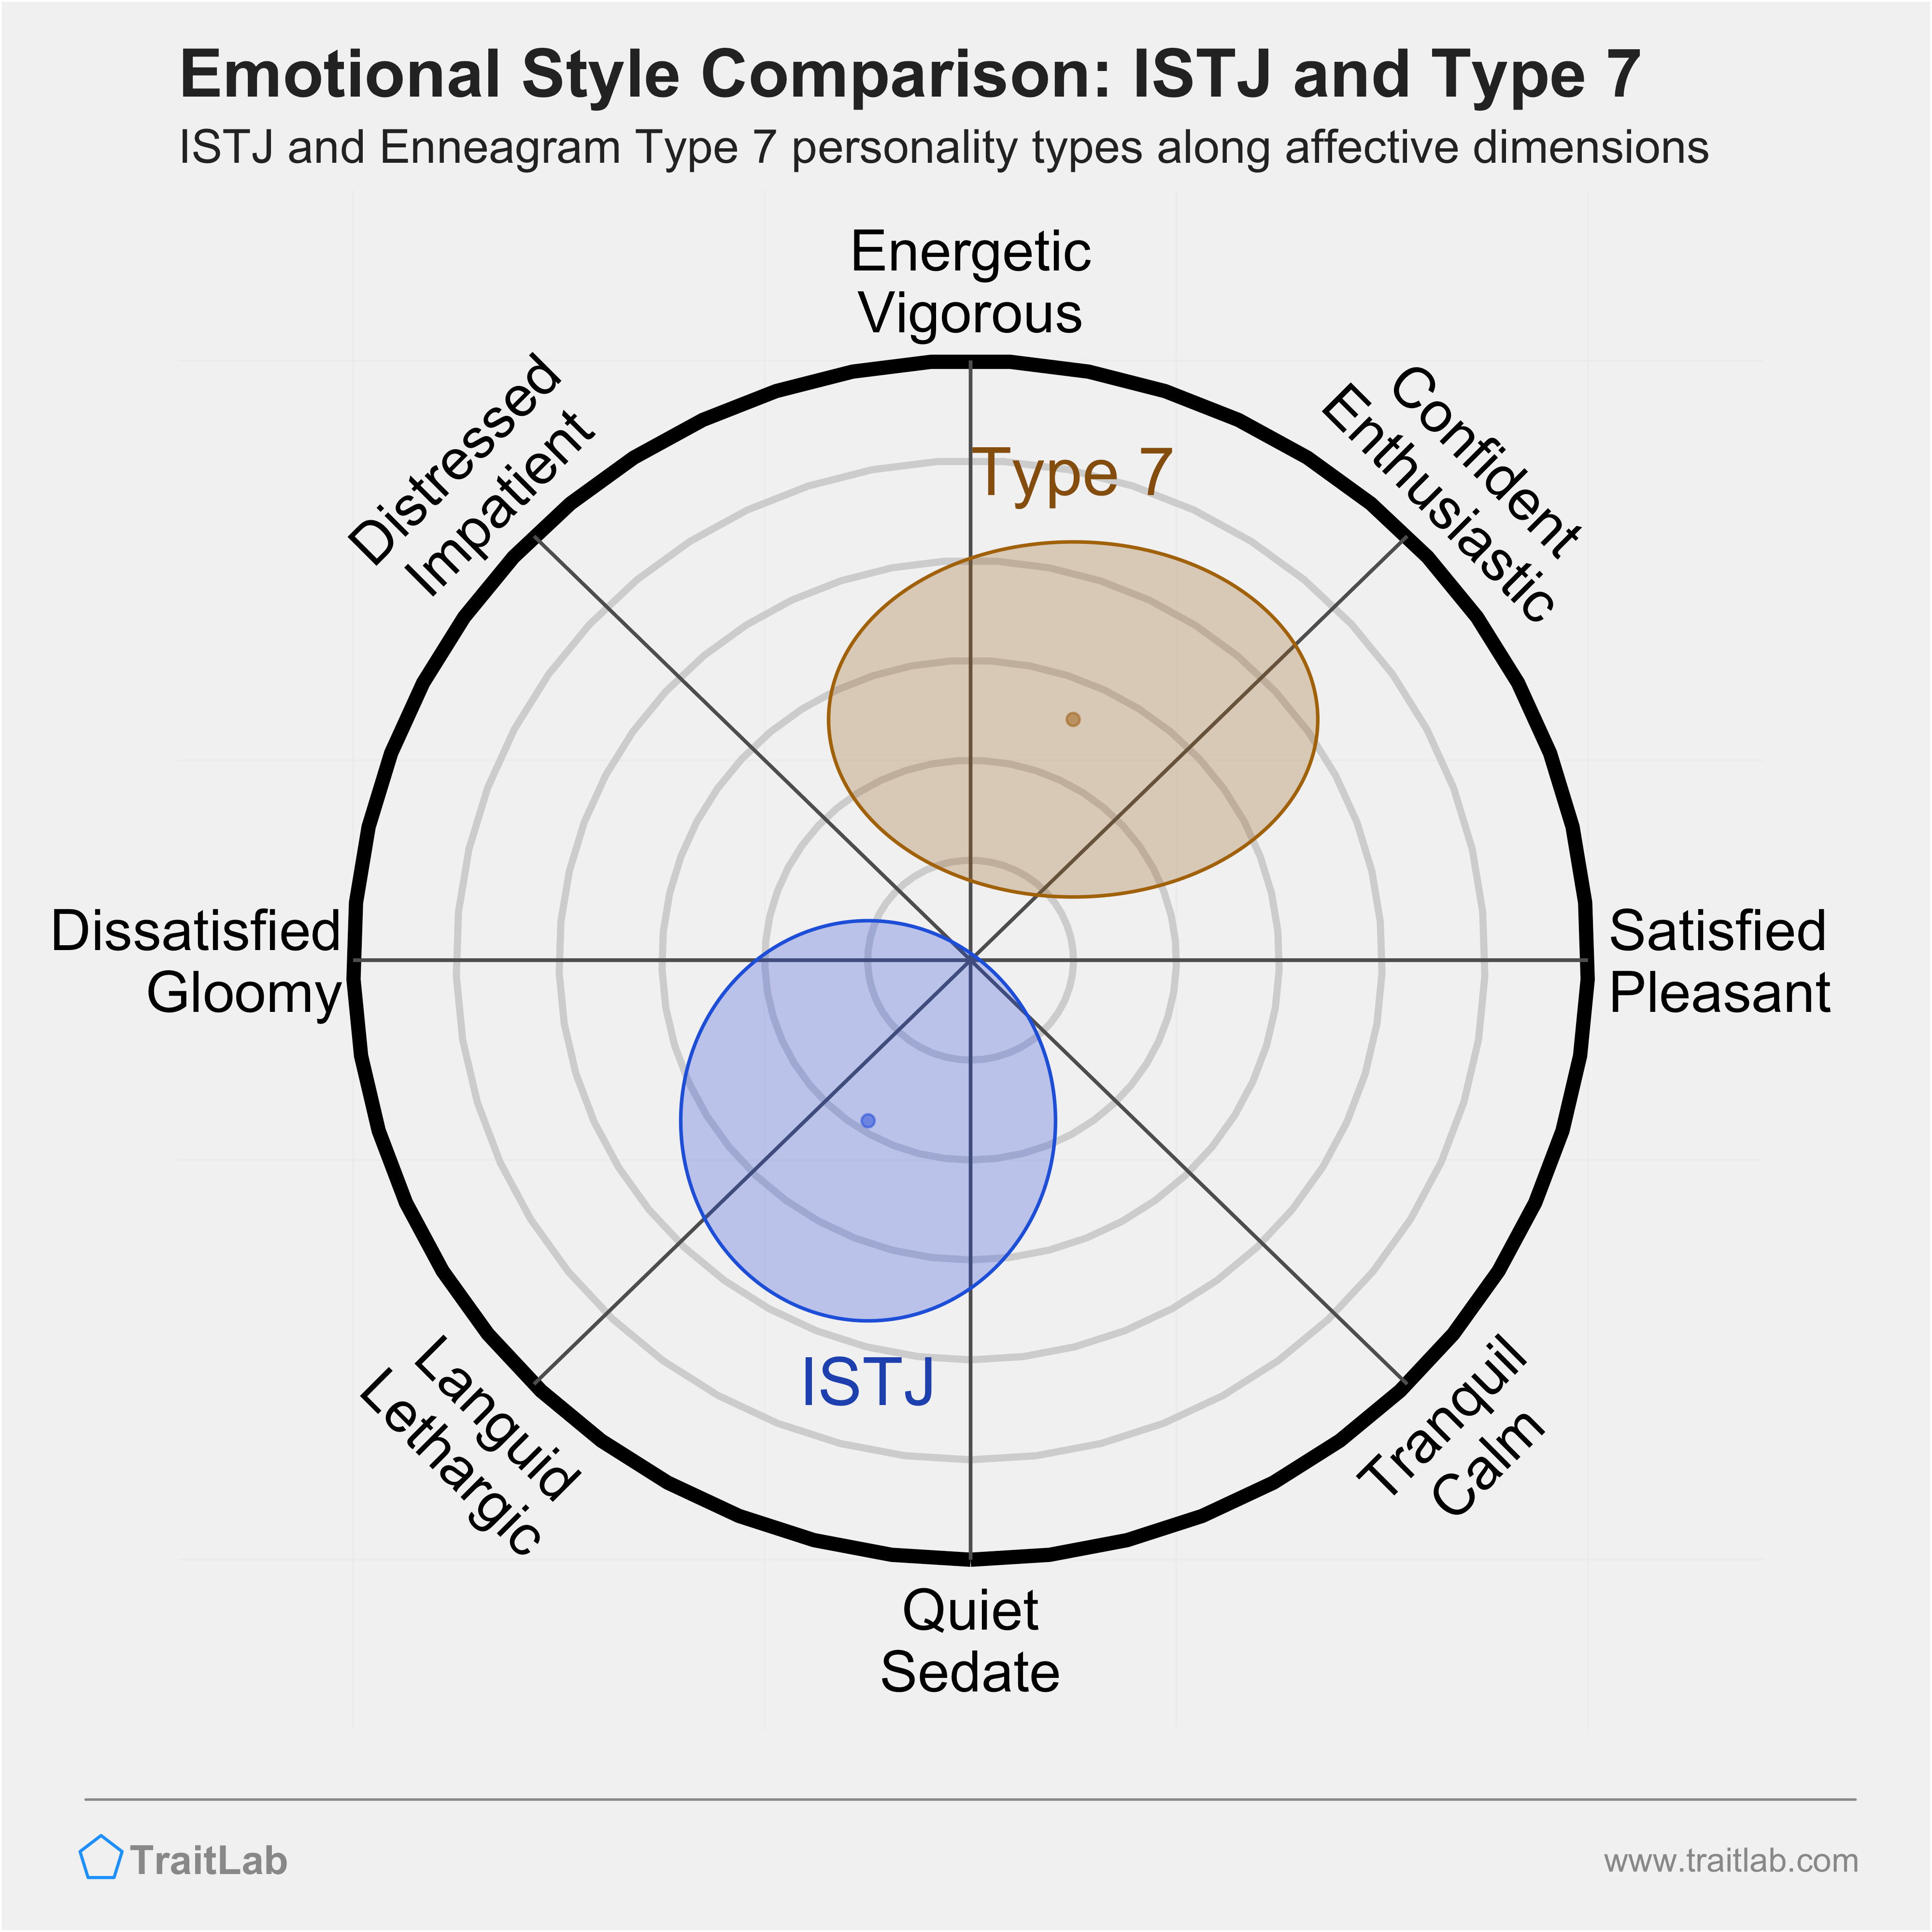 ISTJ and Type 7 comparison across emotional (affective) dimensions